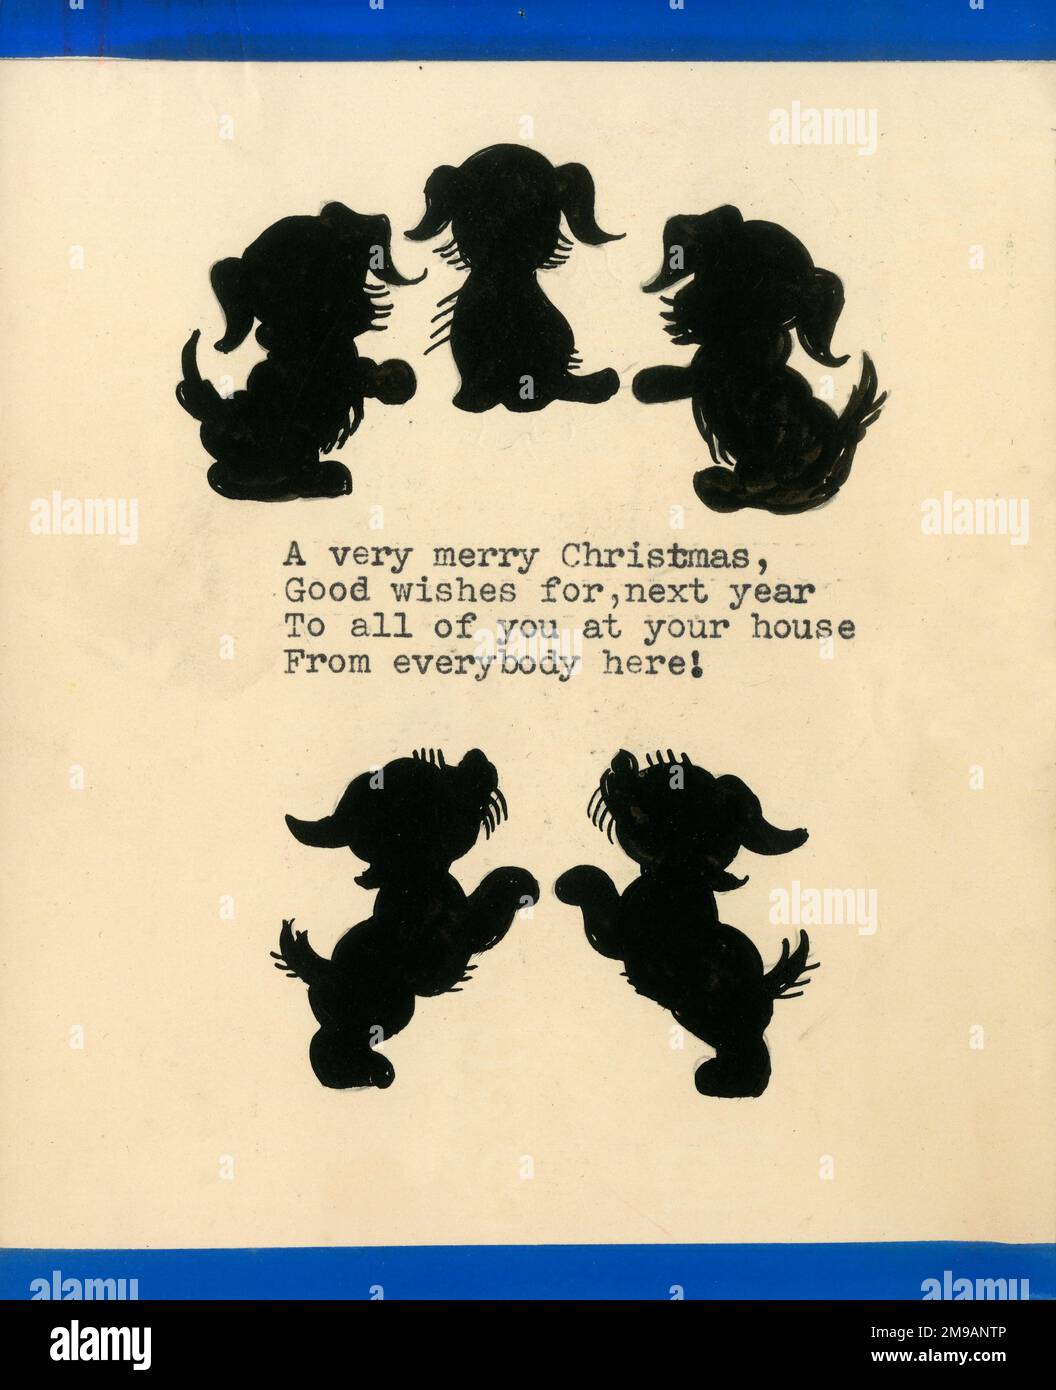 Original Artwork - Design for a Christmas Greetings card - silhouette of five little puppies. Stock Photo